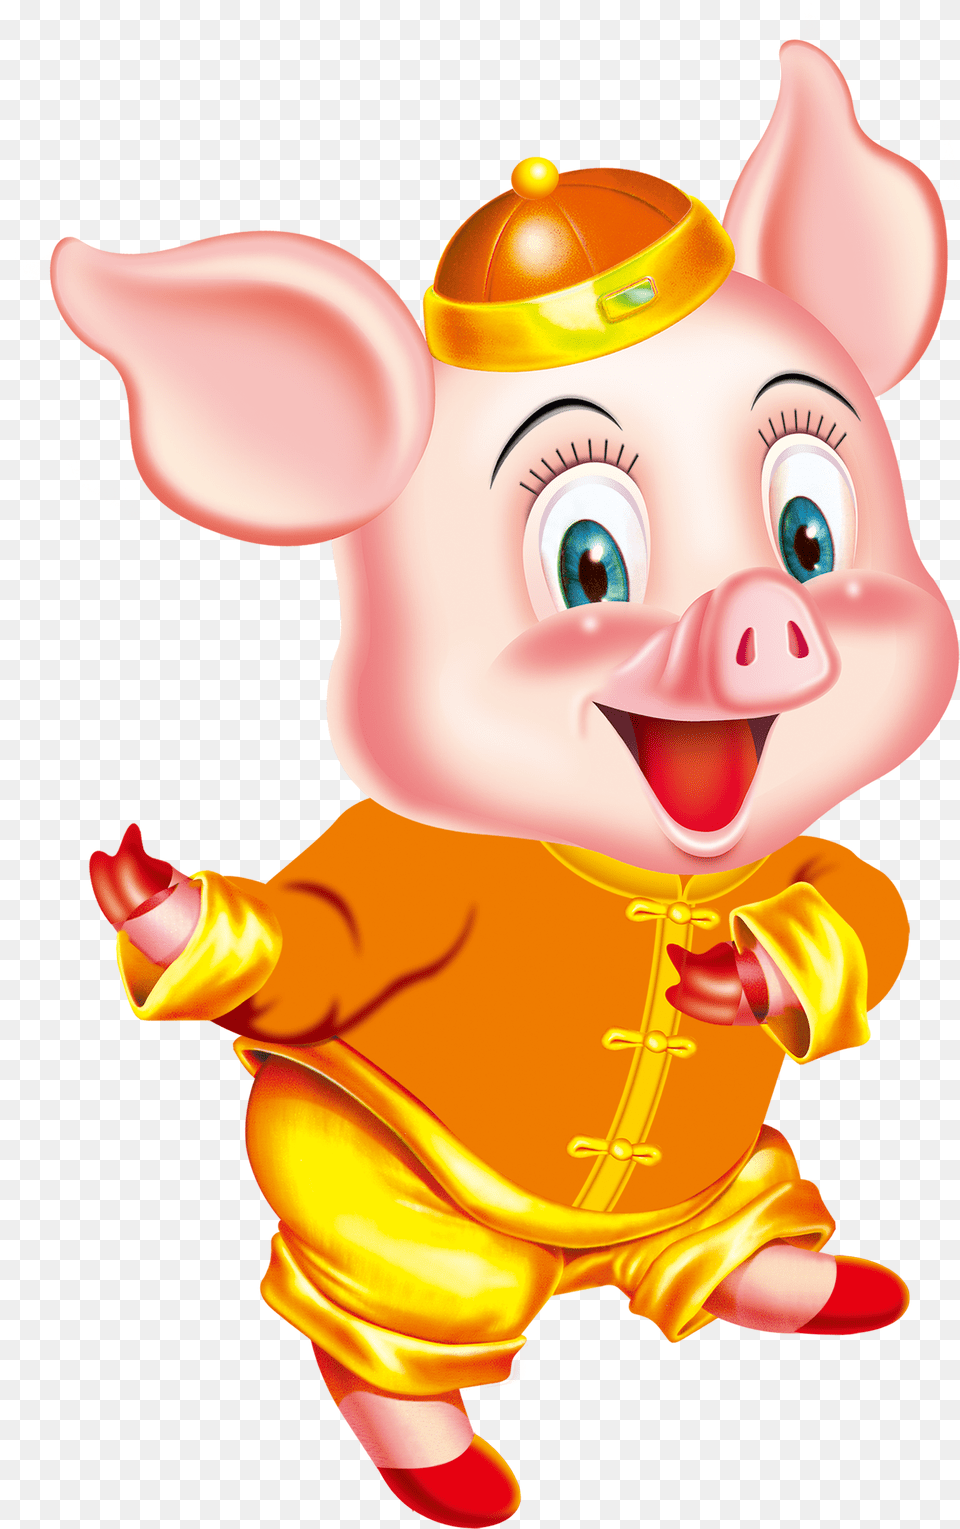 Feng Fortune Telling Chinese Pig Wu Xing Zodiac Clipart Cartoon Pig Chinese Zodiac, Baby, Person Free Transparent Png